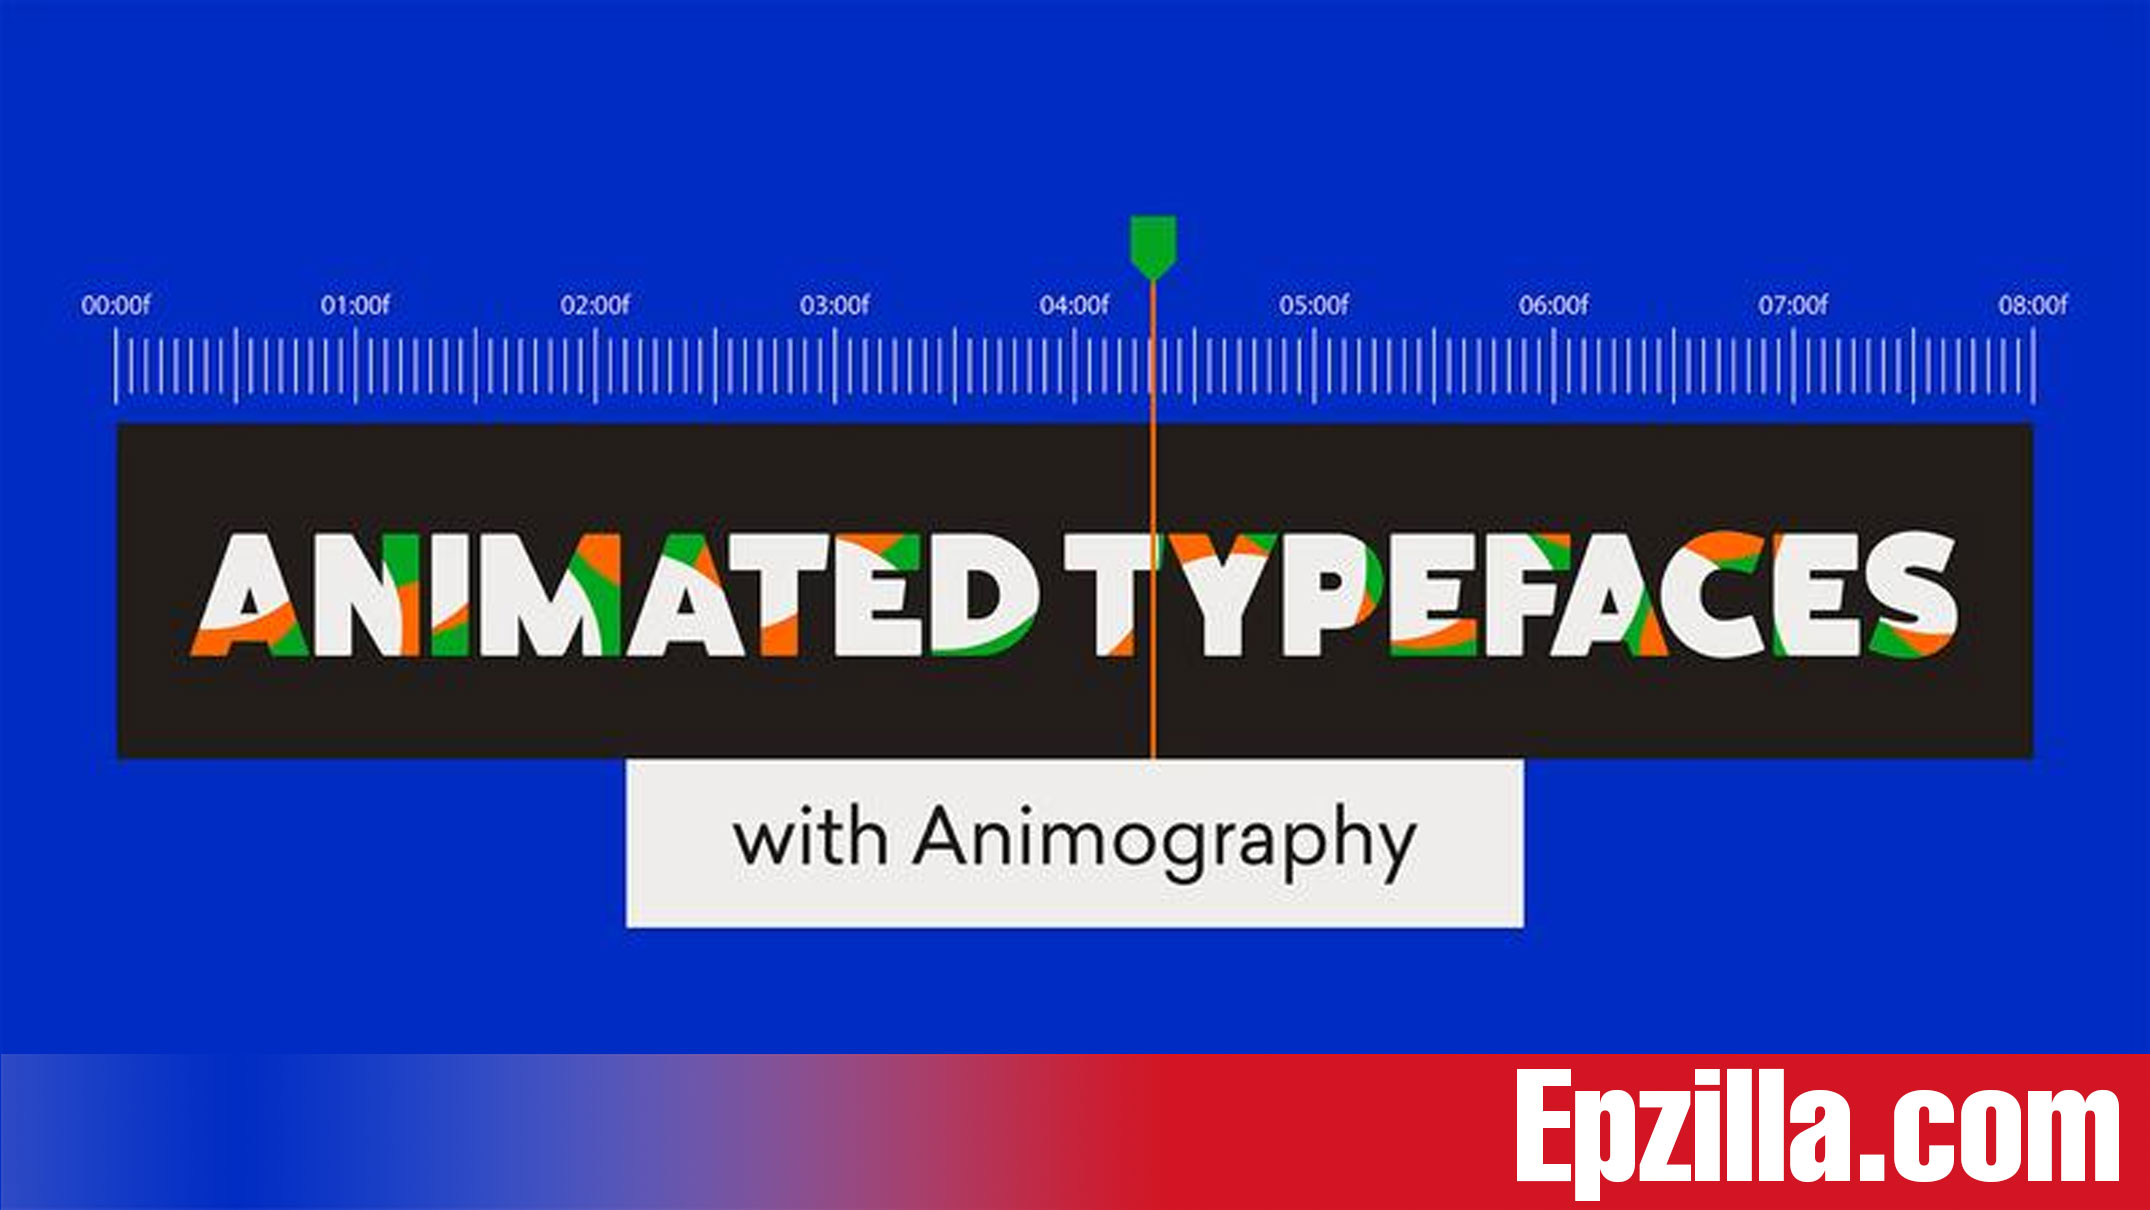 Motion Design School Animated Typefaces with Animography Free Download Epzilla.com